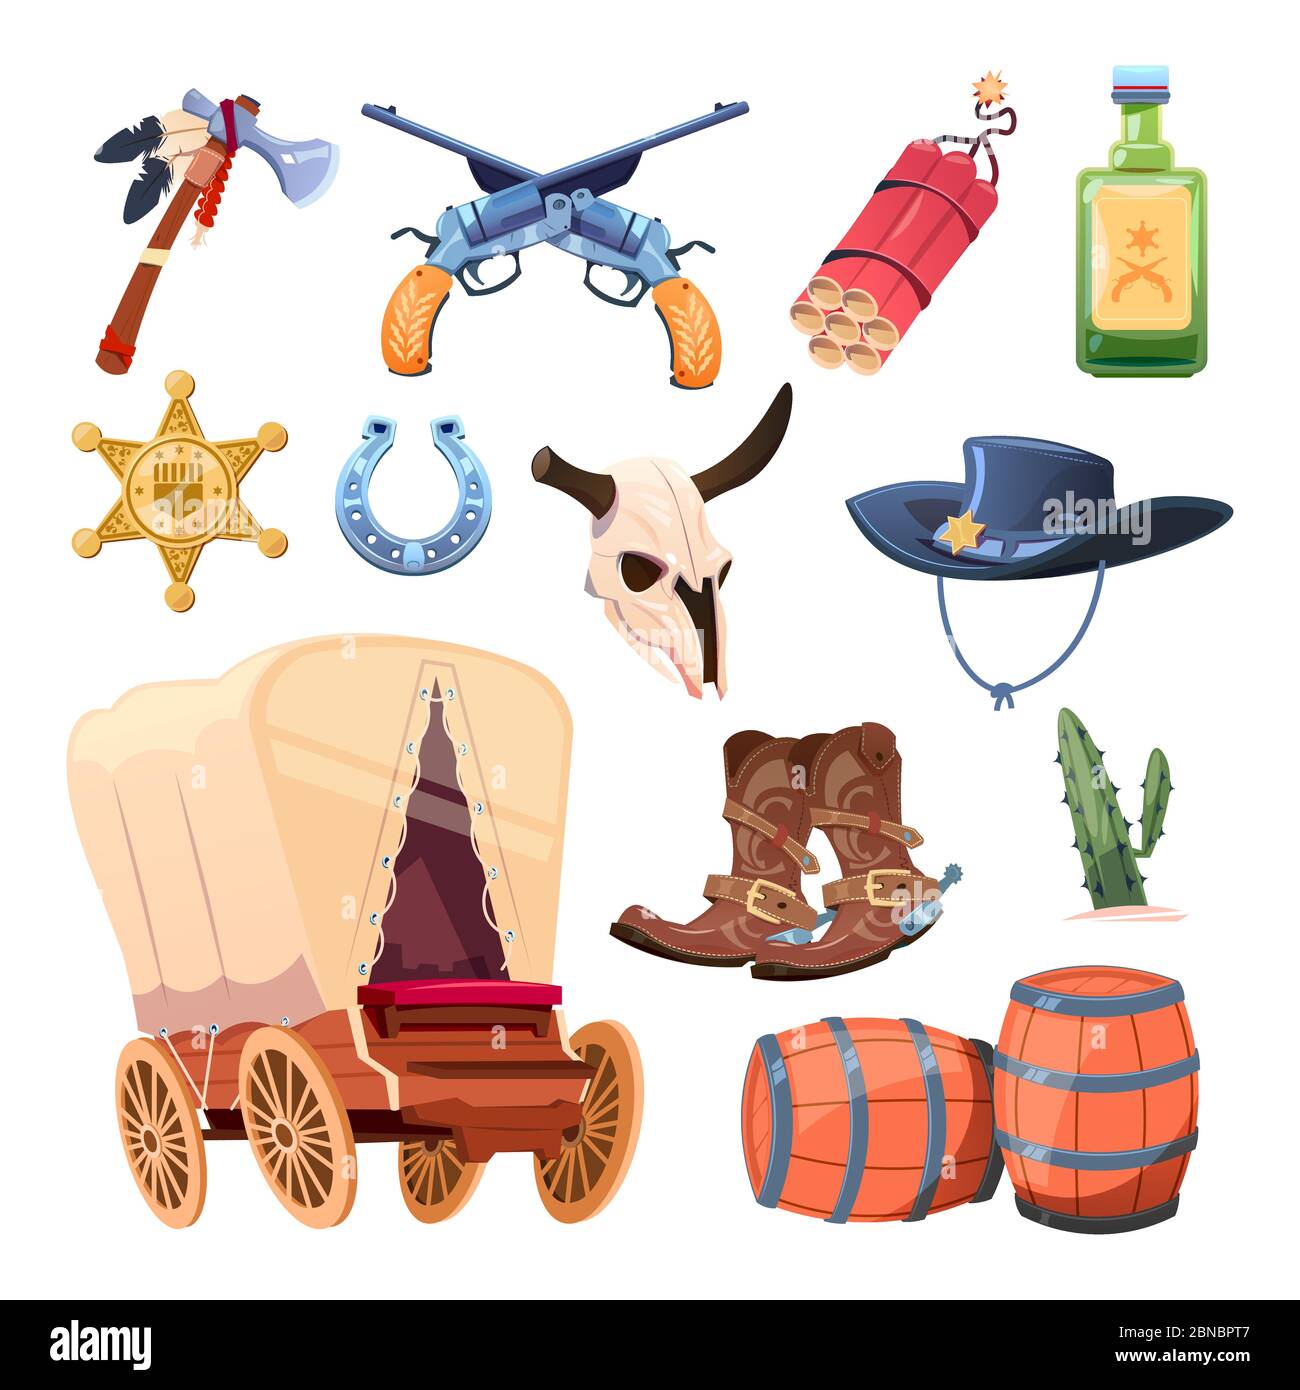 Wild west cartoon set. Cowboy boots, hat and gun. Bull skull, tomahawk, drink, dessert flower isolated on white background. Illustration of cactus and sheriff star, gun and horseshoe Stock Vector